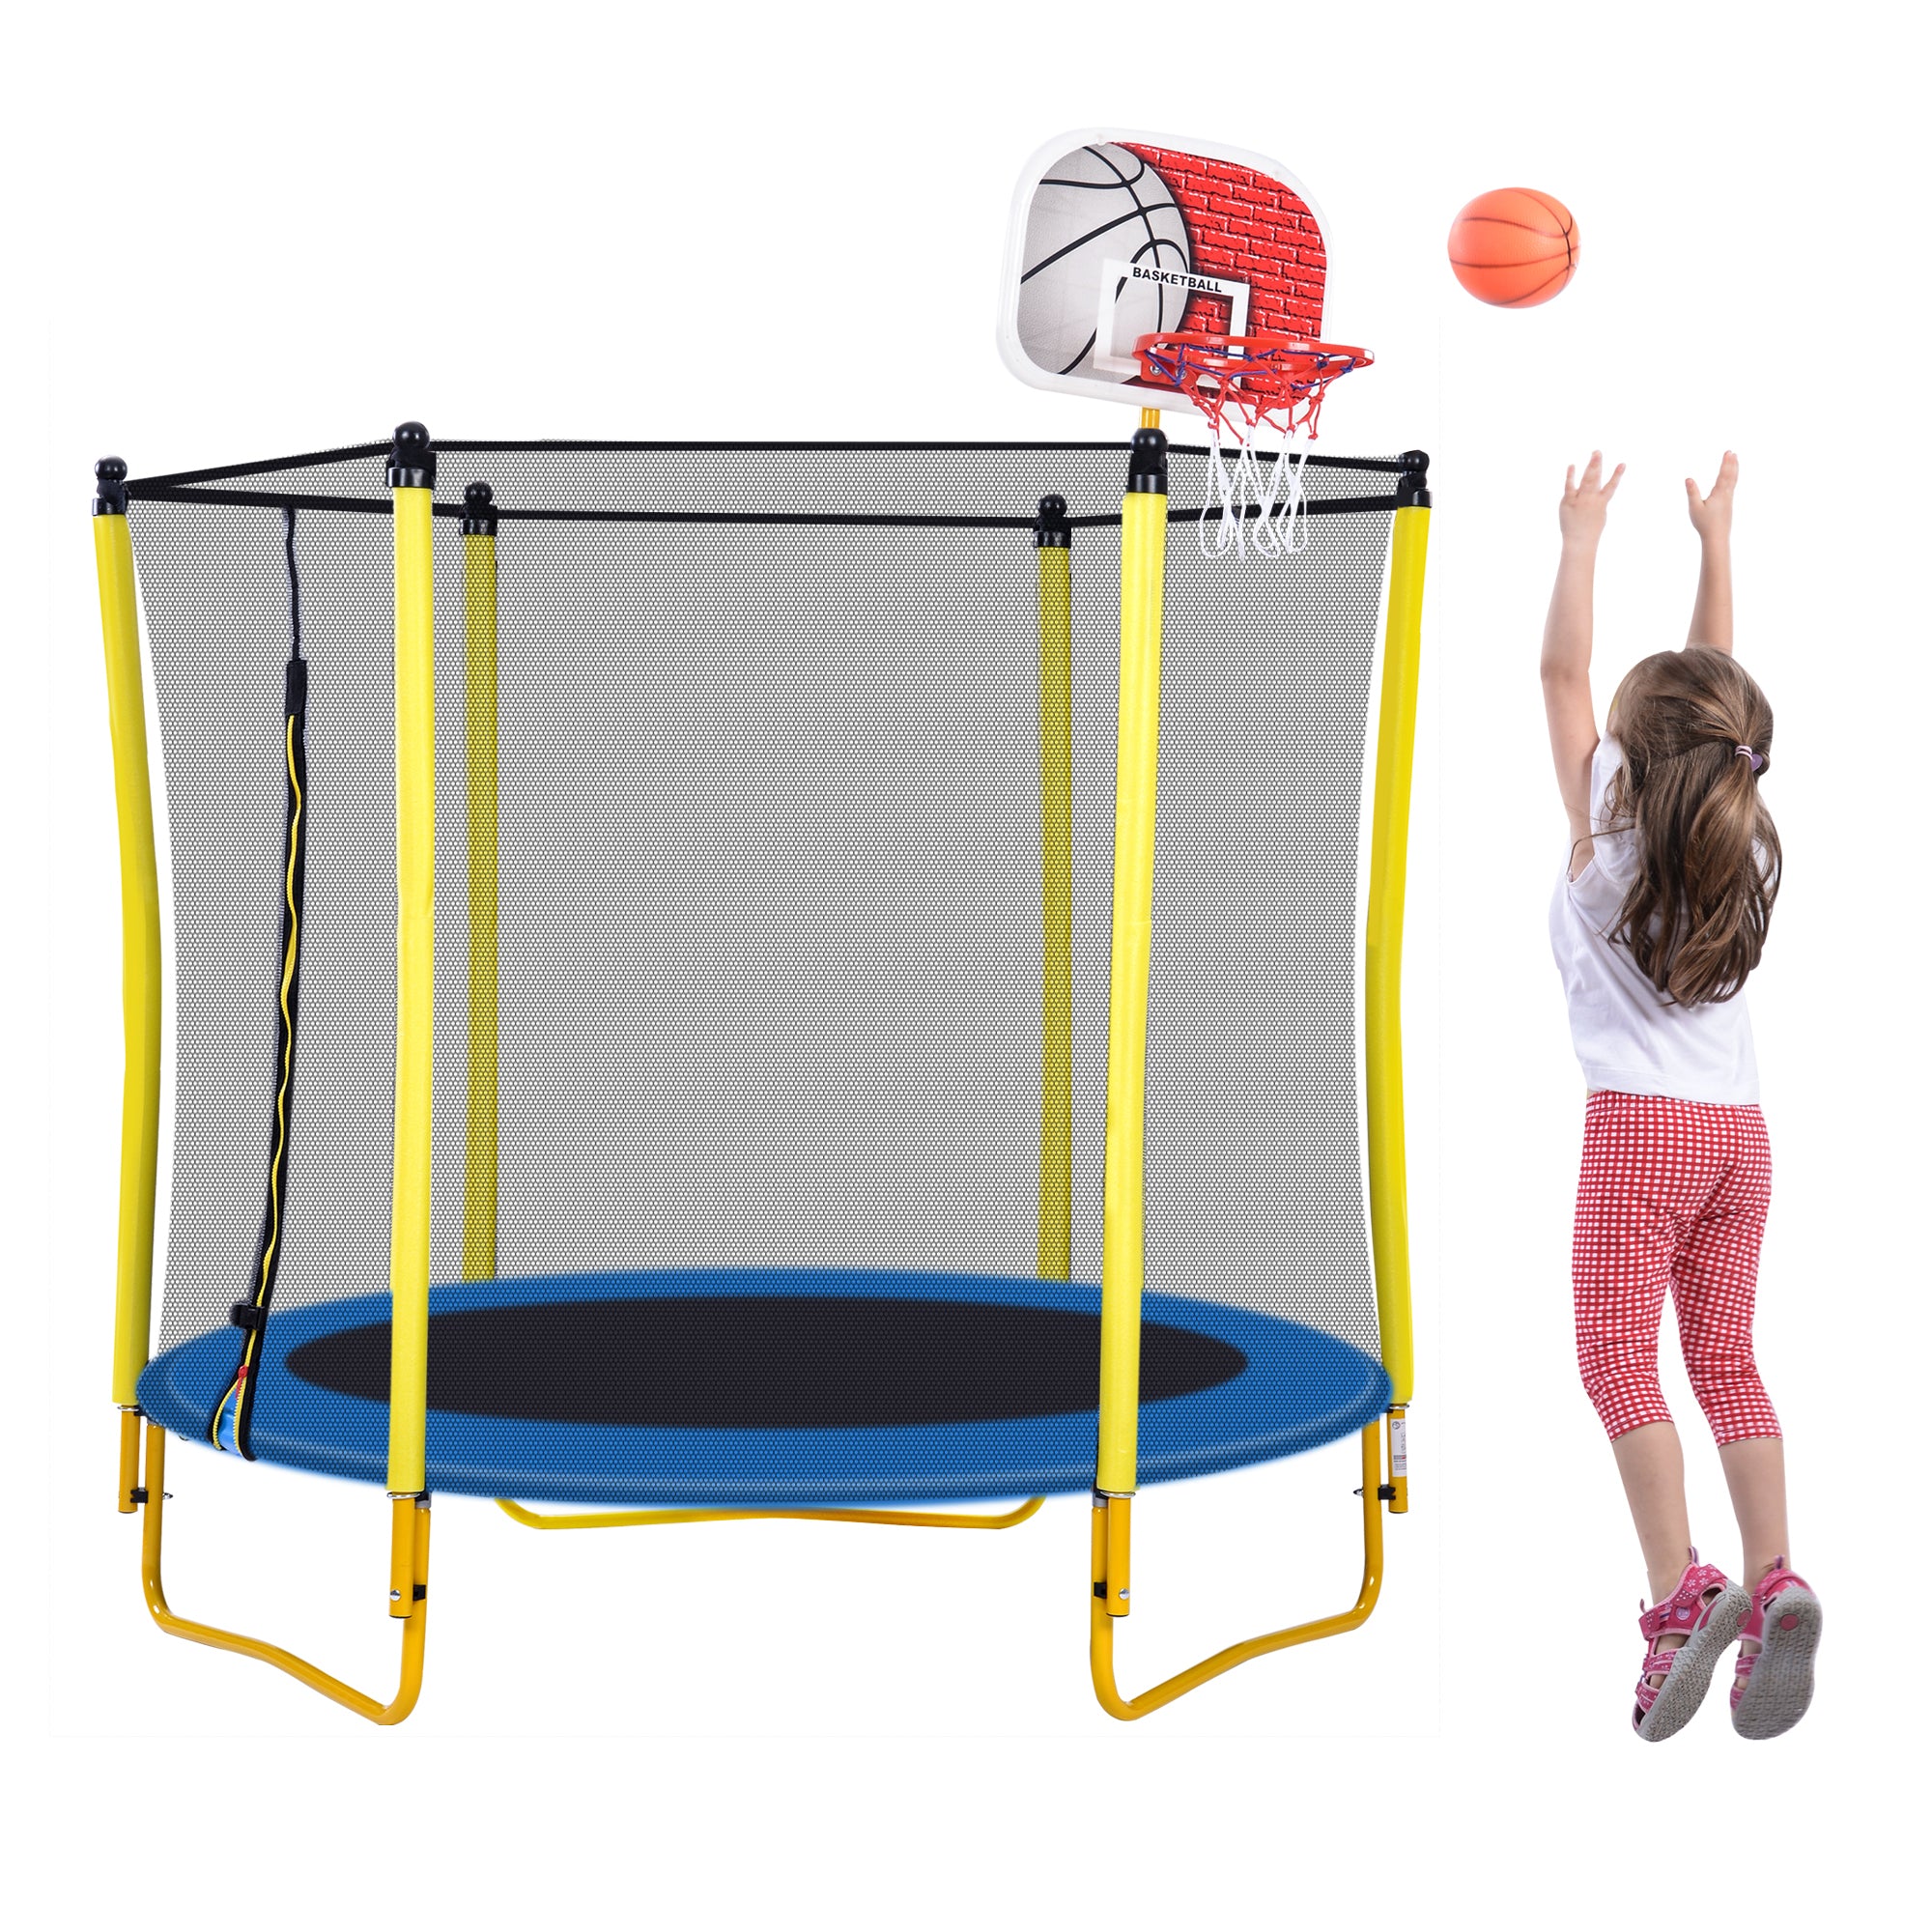 Mini Outdoor Trampoline with Basketball Hoop 5.5FT // Yellow